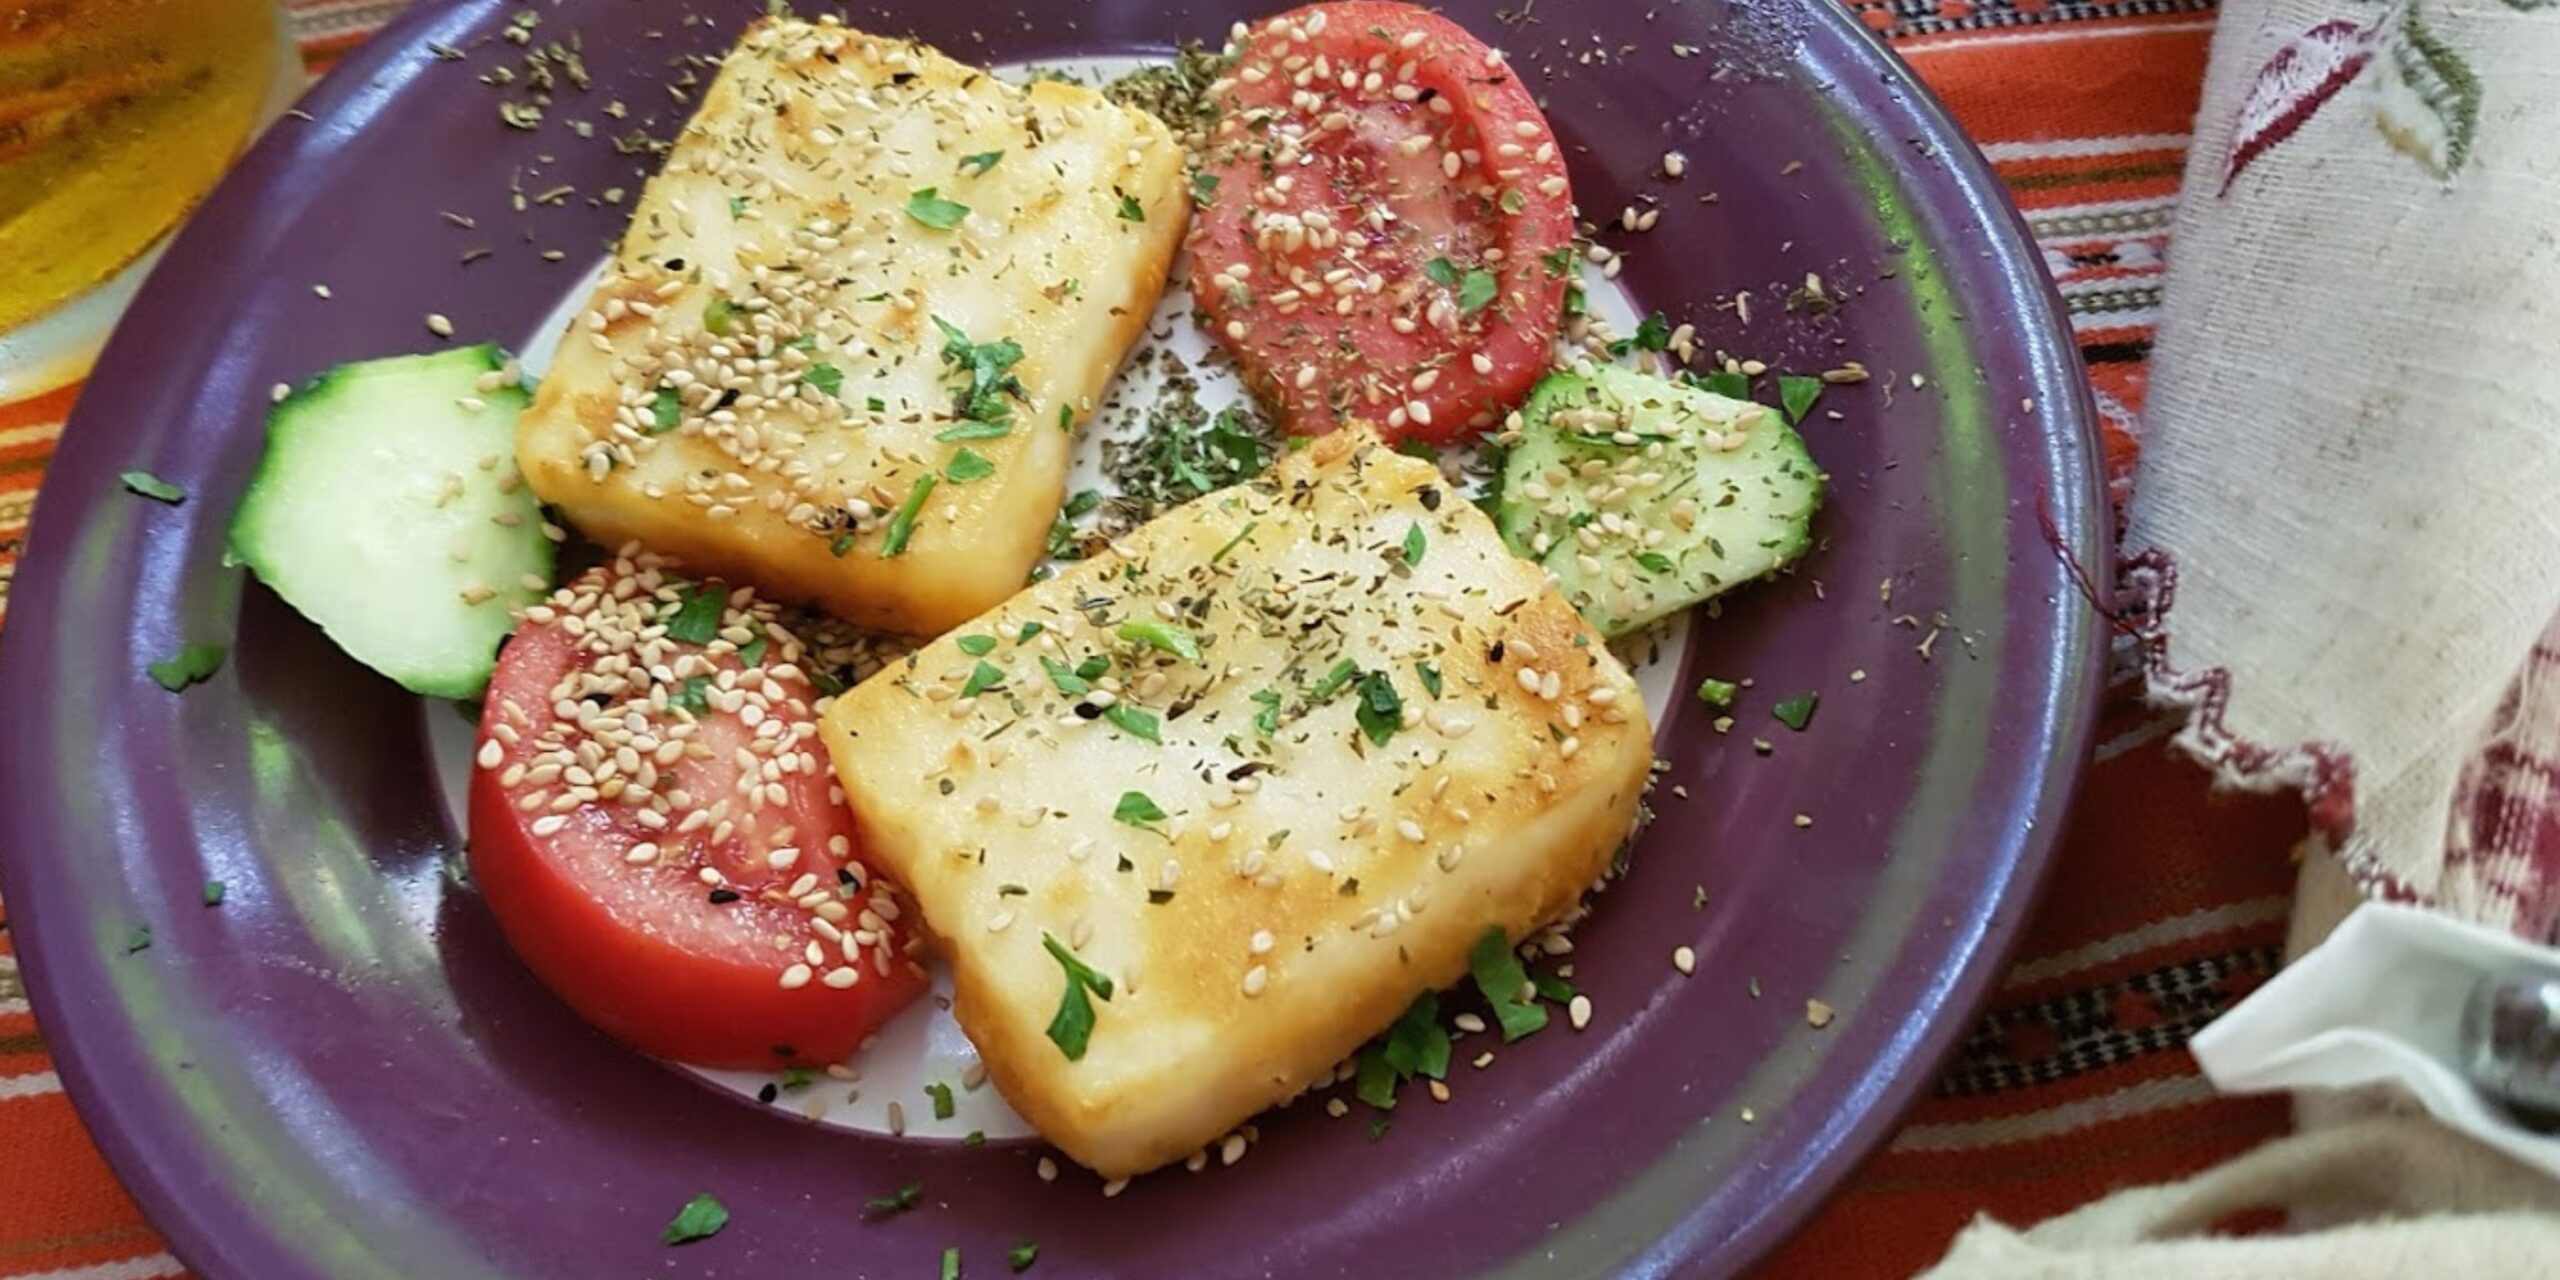 Plate with grilled cheese, tomato slices, and cucumber garnished with herbs and sesame seeds.